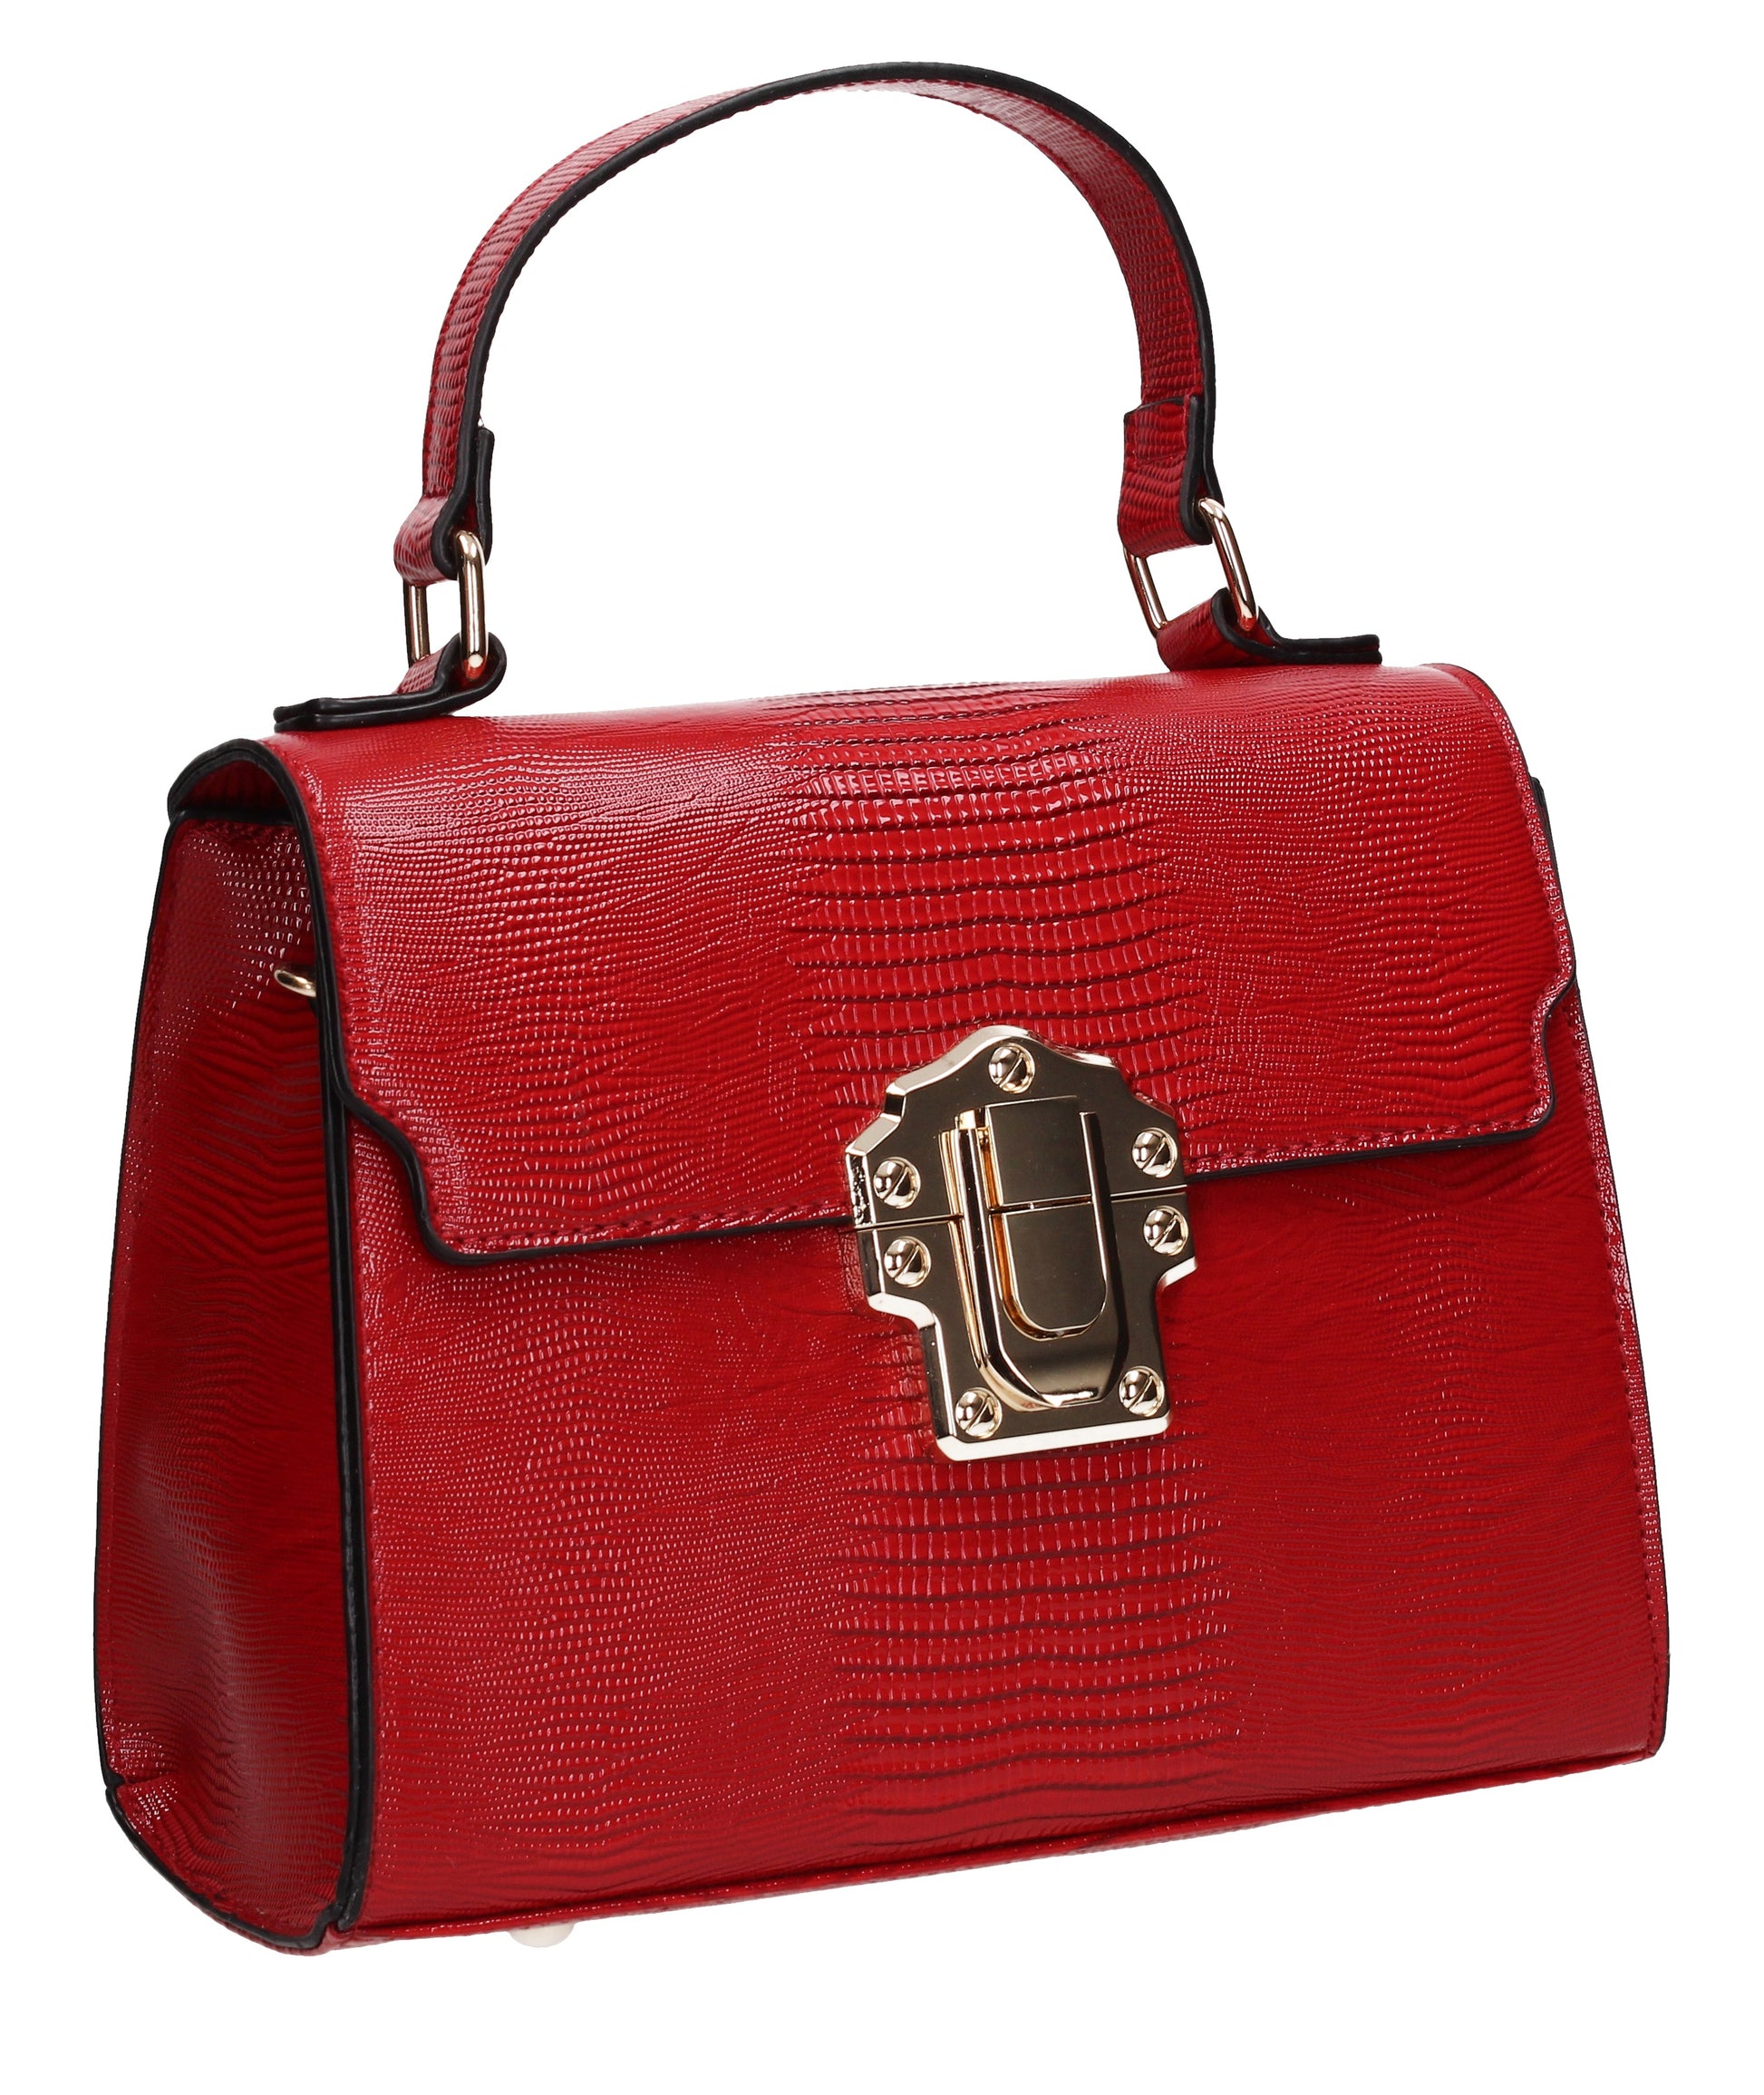 Swanky Swans Charlotte Handbag RedPerfect for School, Weddings, Day out!